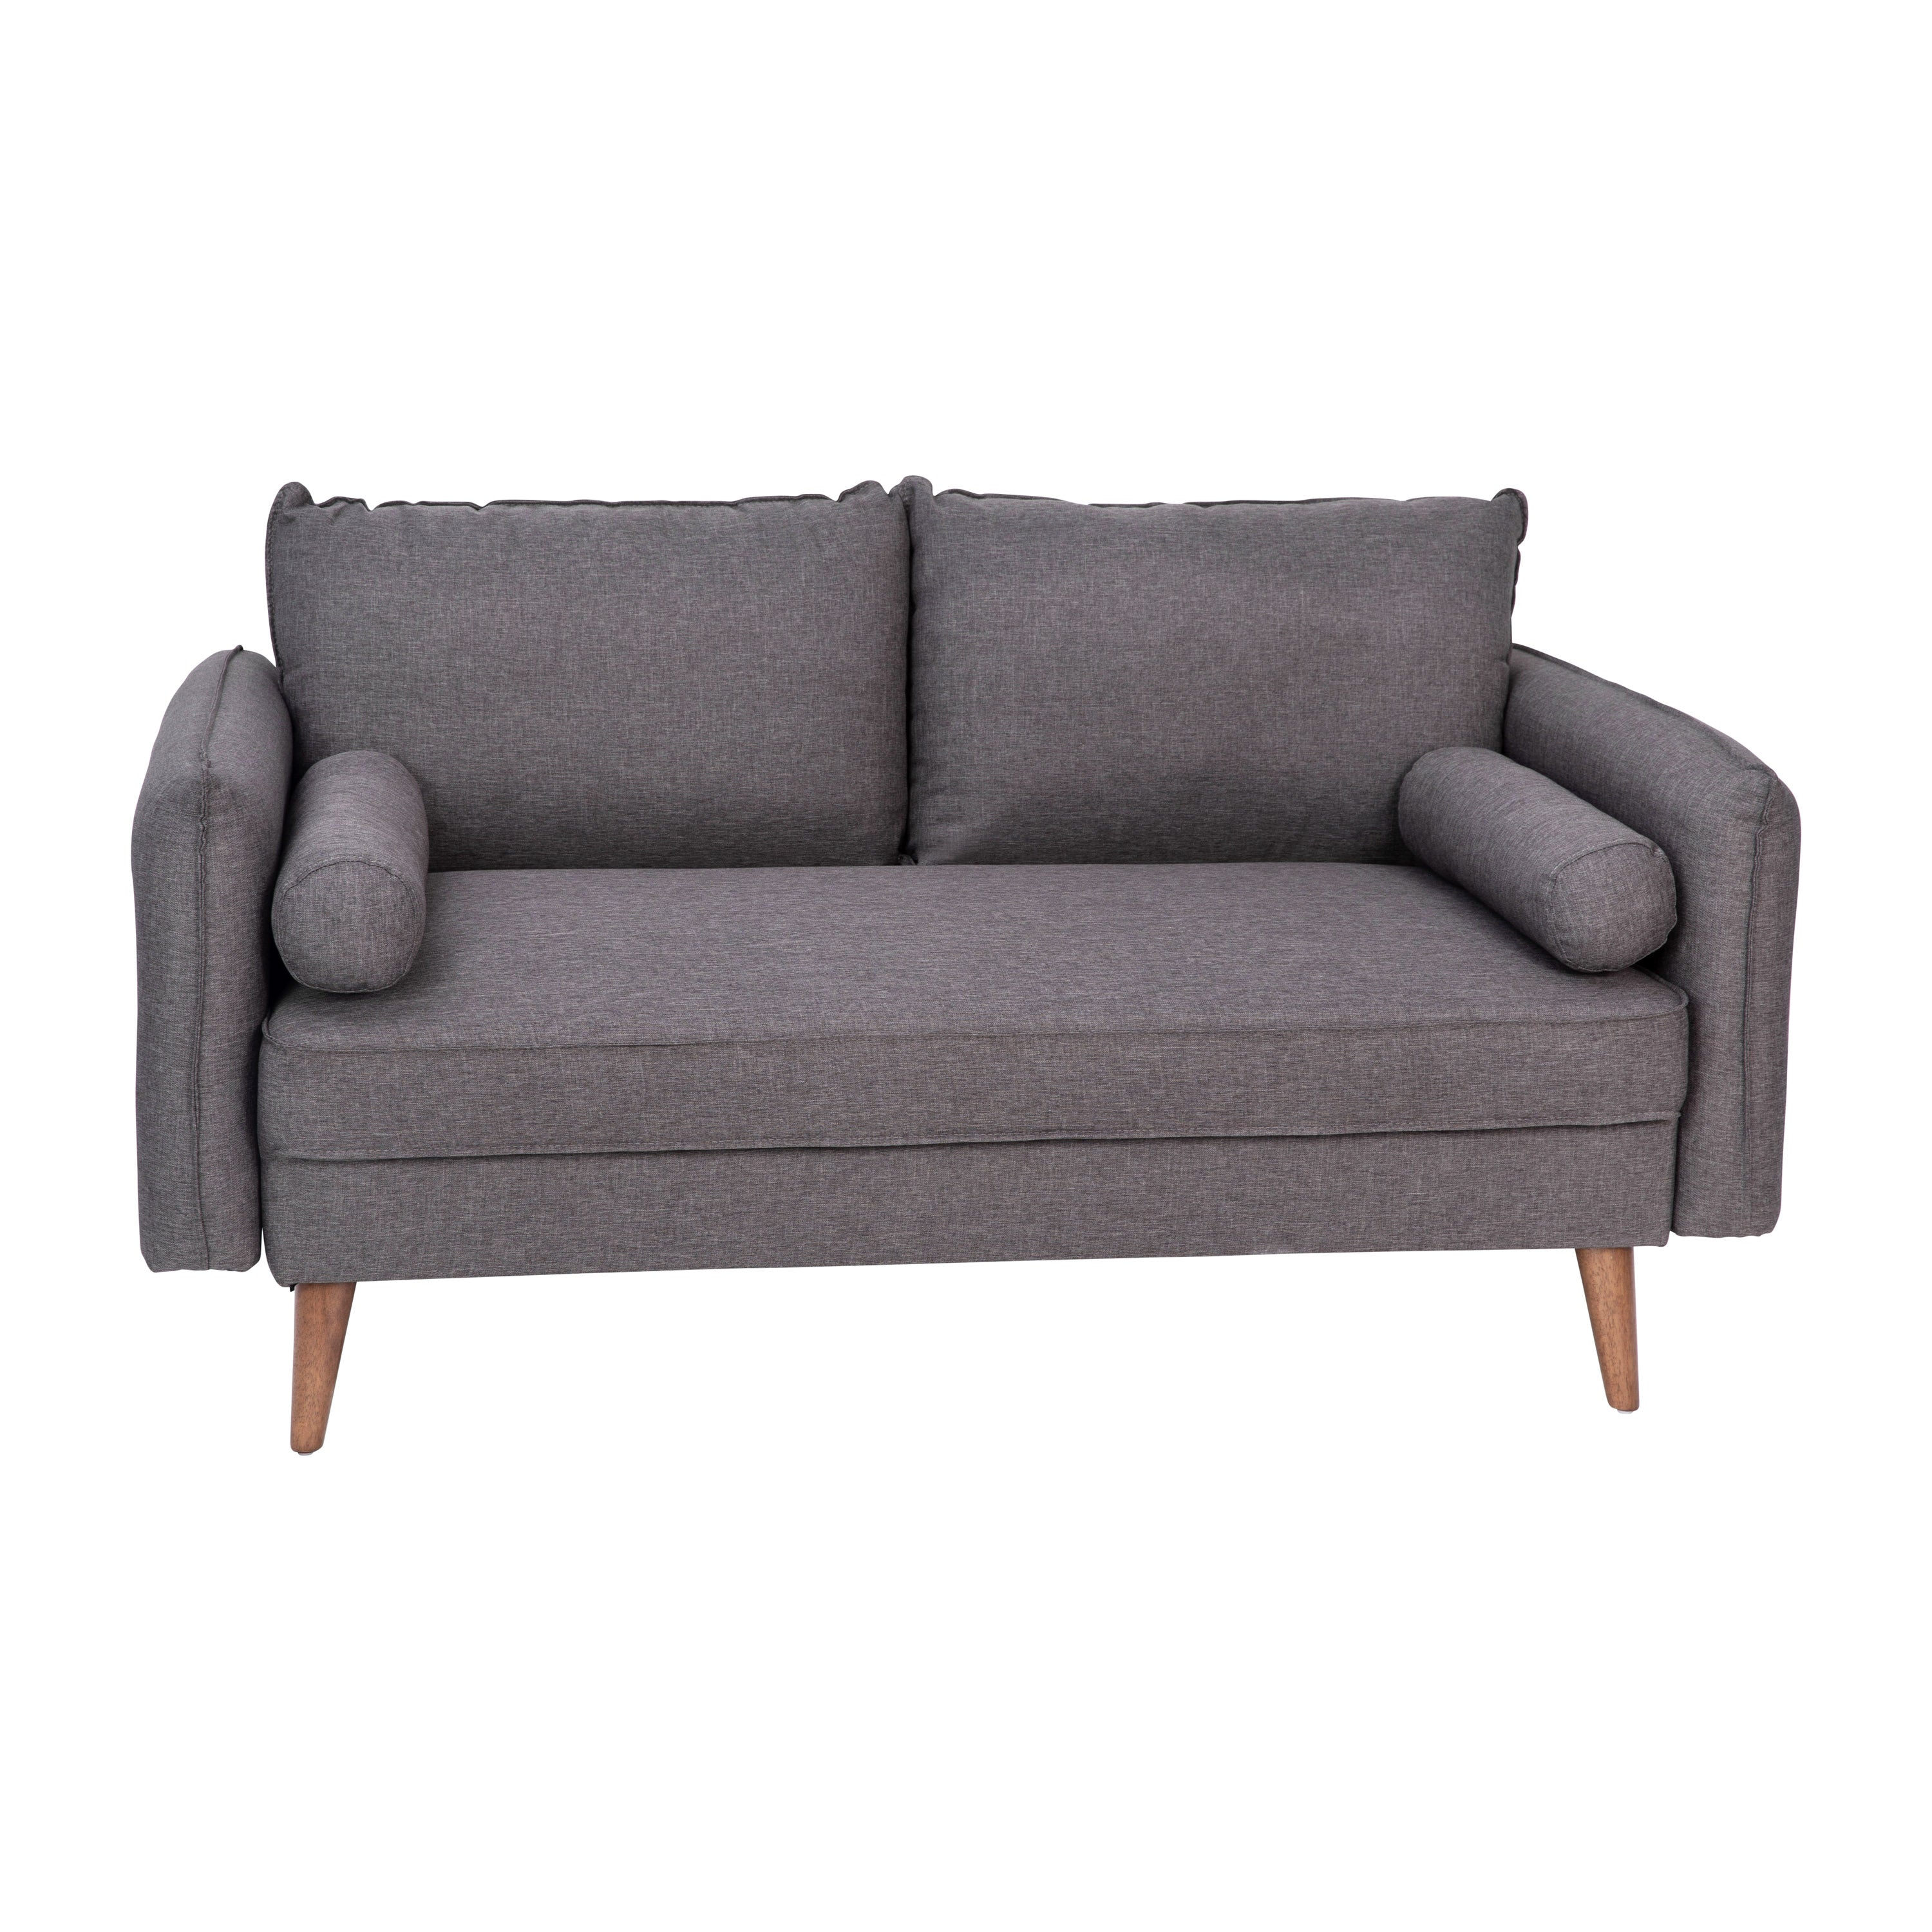 Evie Mid-Century Modern Loveseat Sofa with Fabric Upholstery & Solid Wood Legs-Loveseat-Flash Furniture-Wall2Wall Furnishings